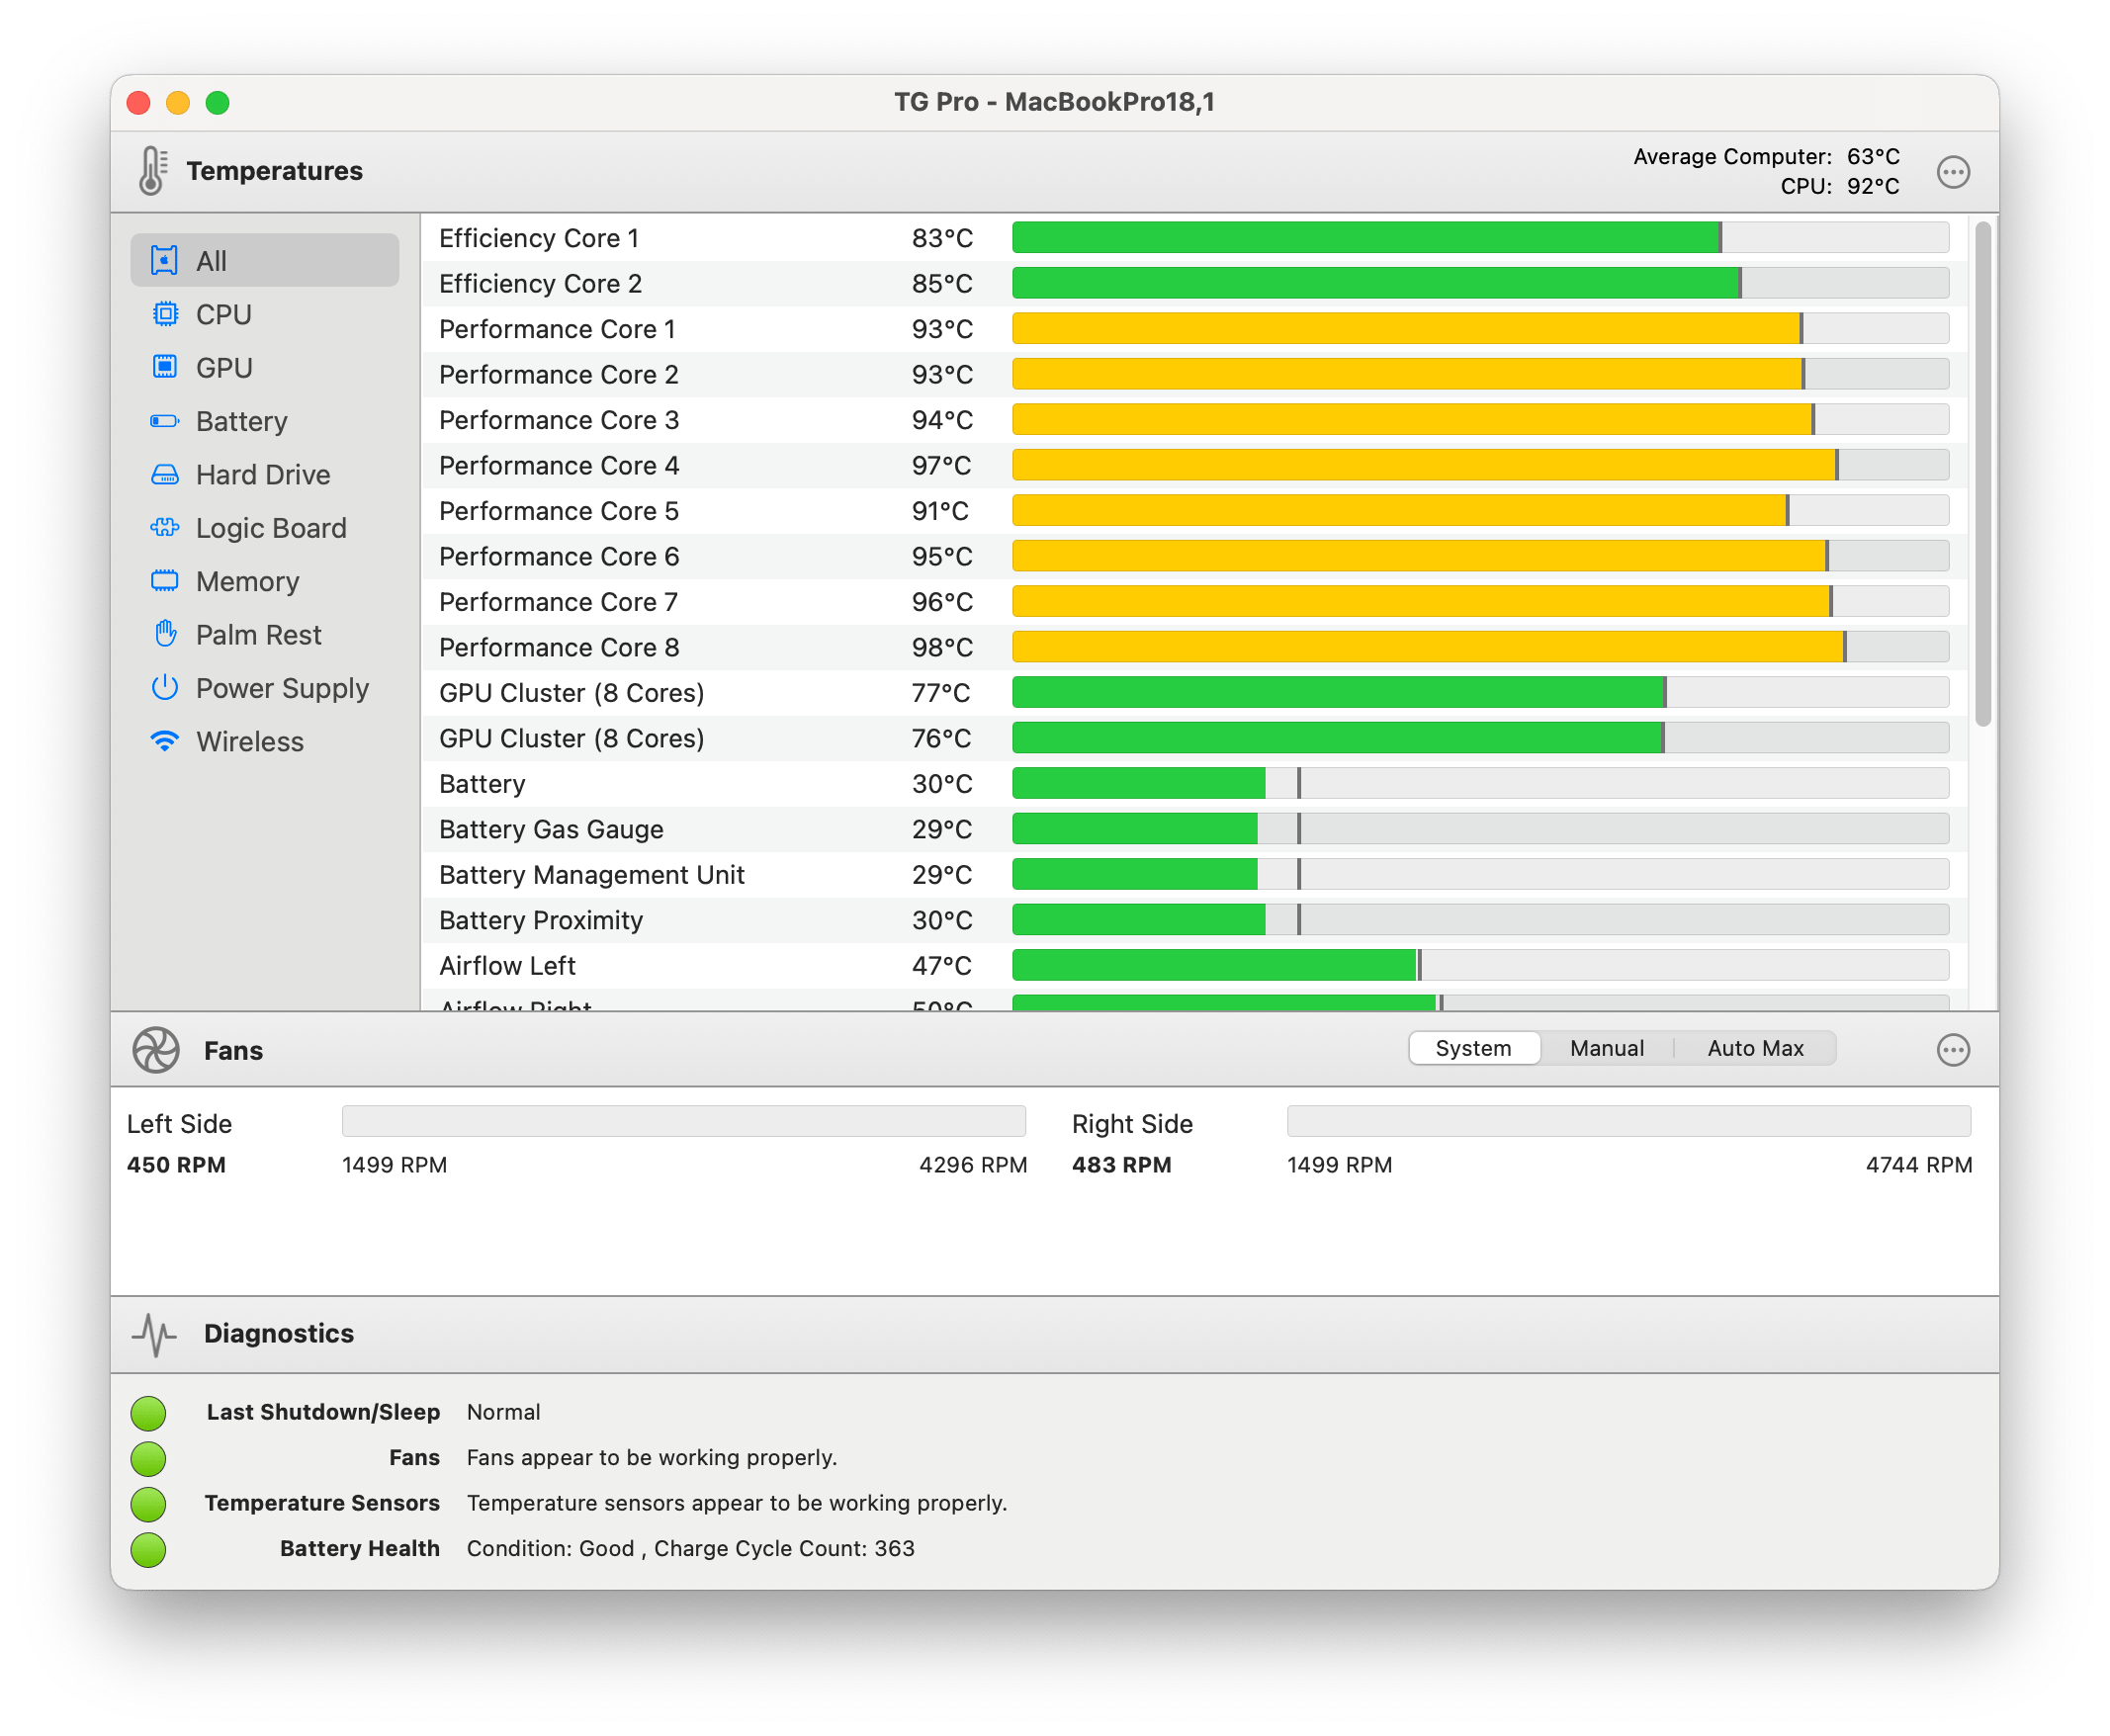 Full sized screenshot of TG Pro showing temperature and fan speeds for the Mac.